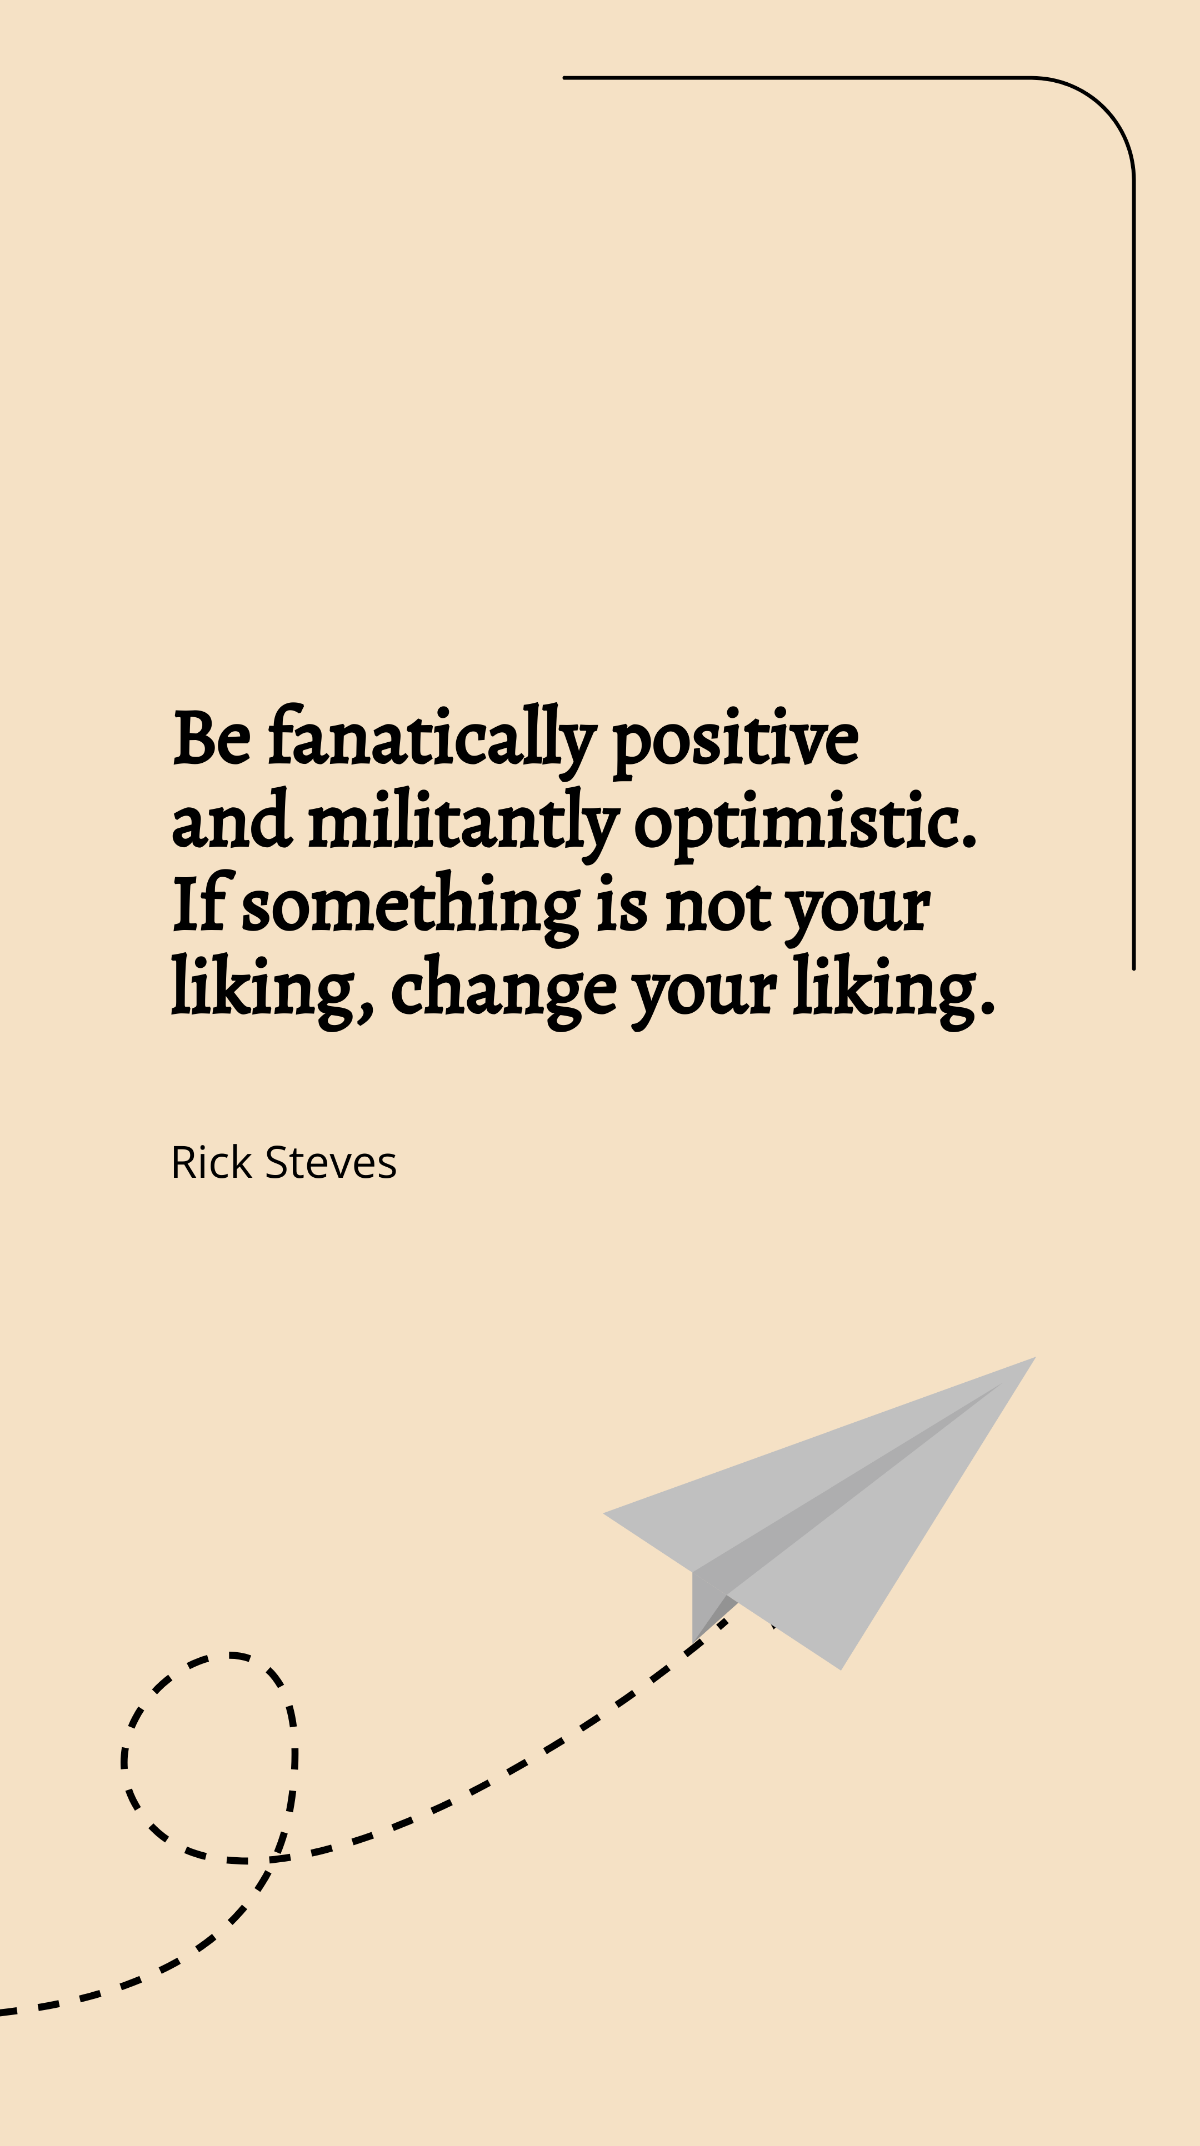 Rick Steves - Be fanatically positive and militantly optimistic. If something is not your liking, change your liking. Template